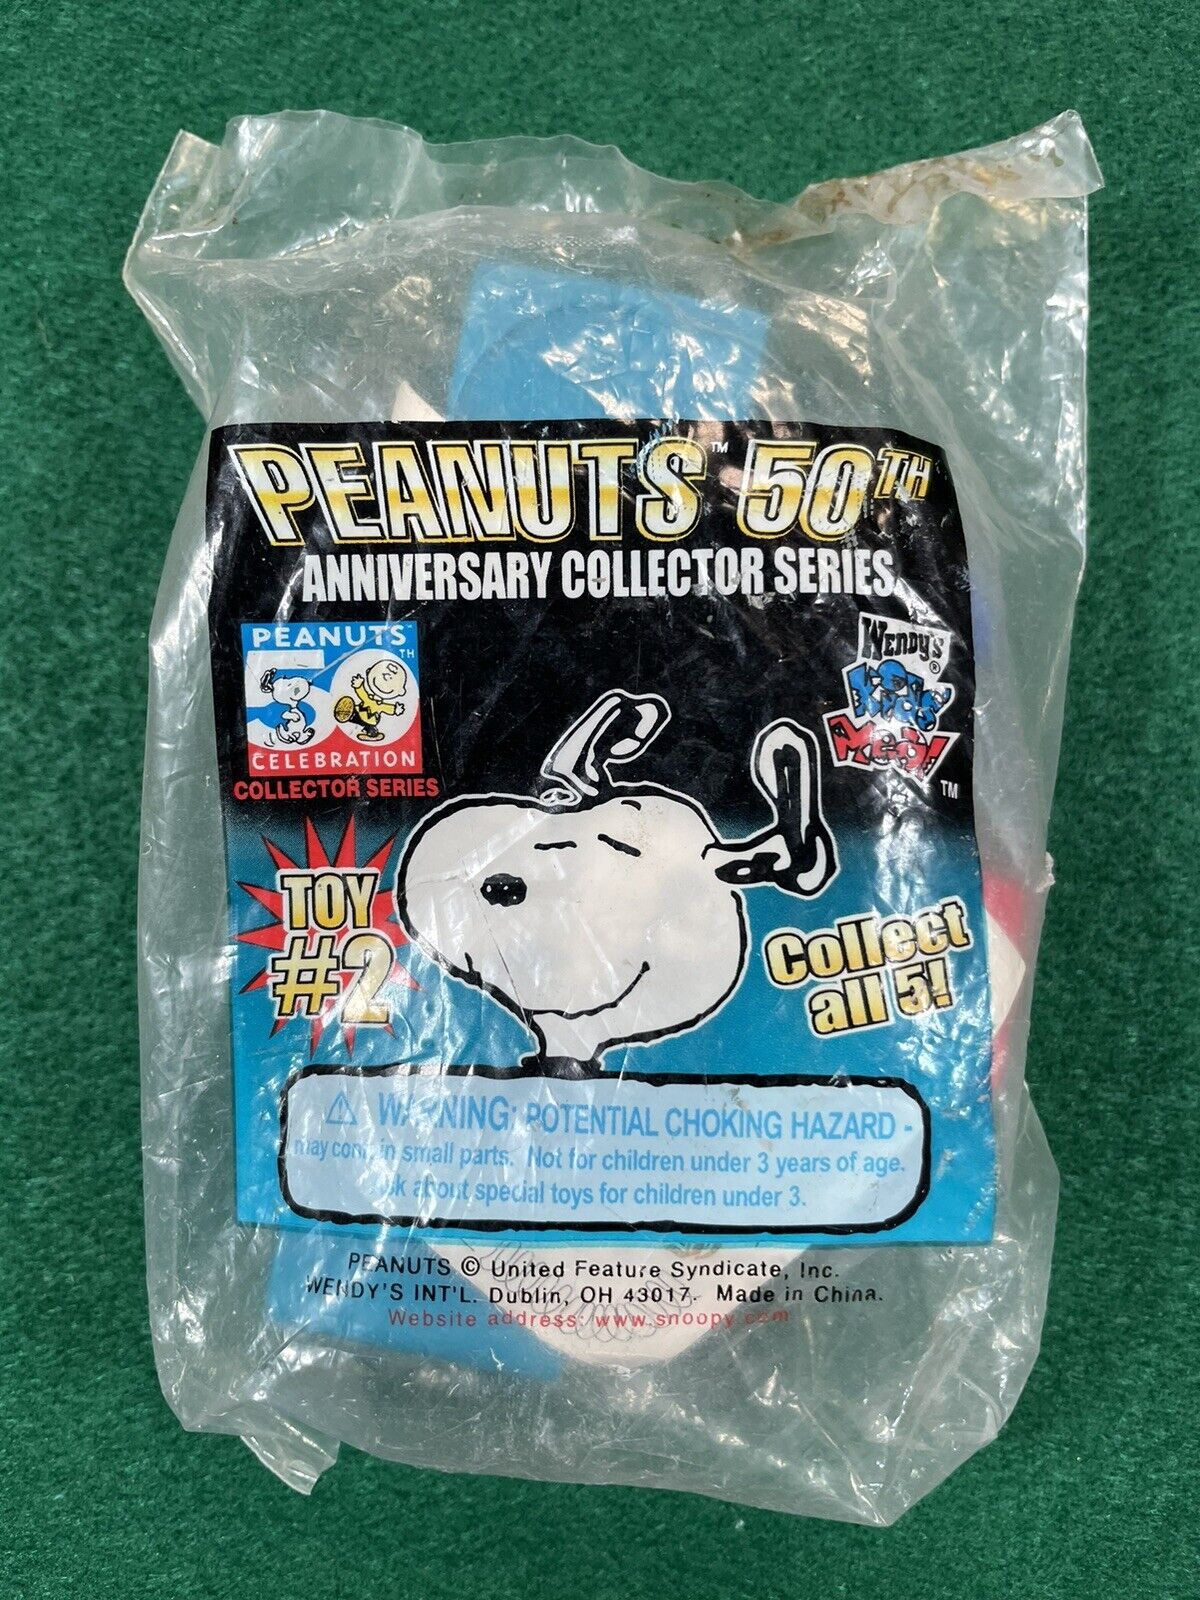 New Peanuts - 50th Anniversary Collector Series Snoopy Wendy’s Toy #2